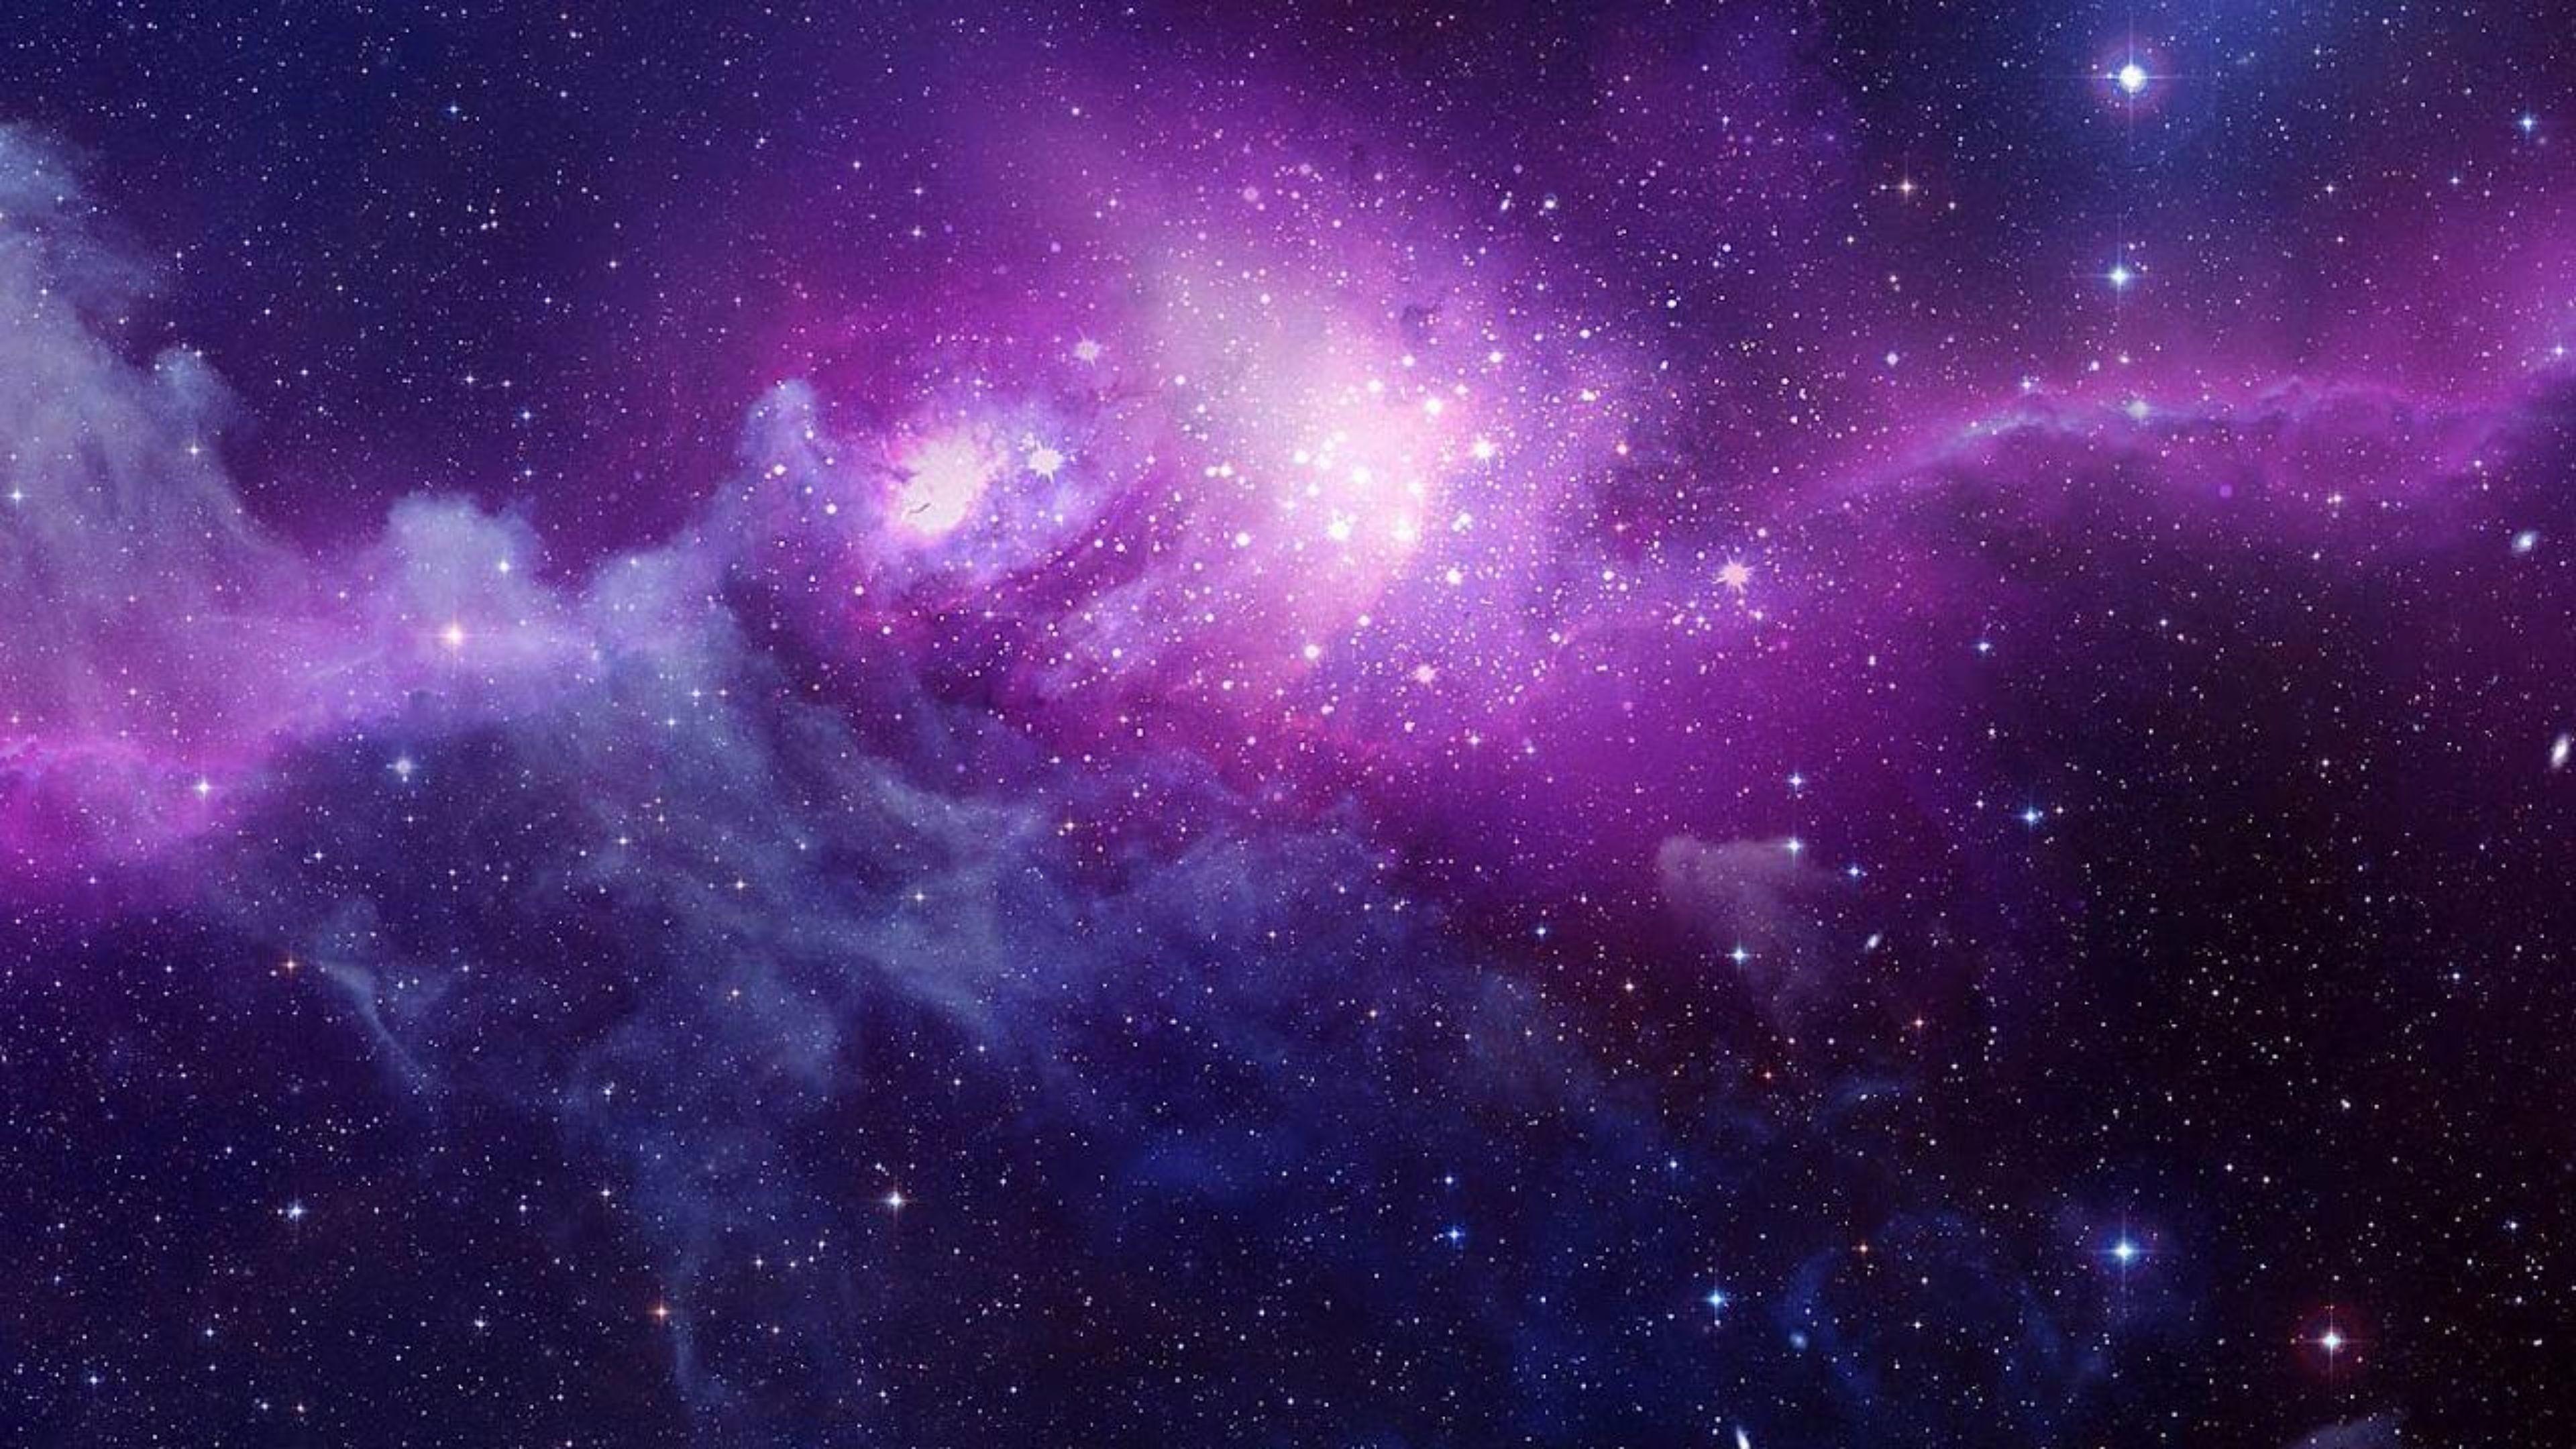 4K Space Wallpaper are the best. Here is a few I like